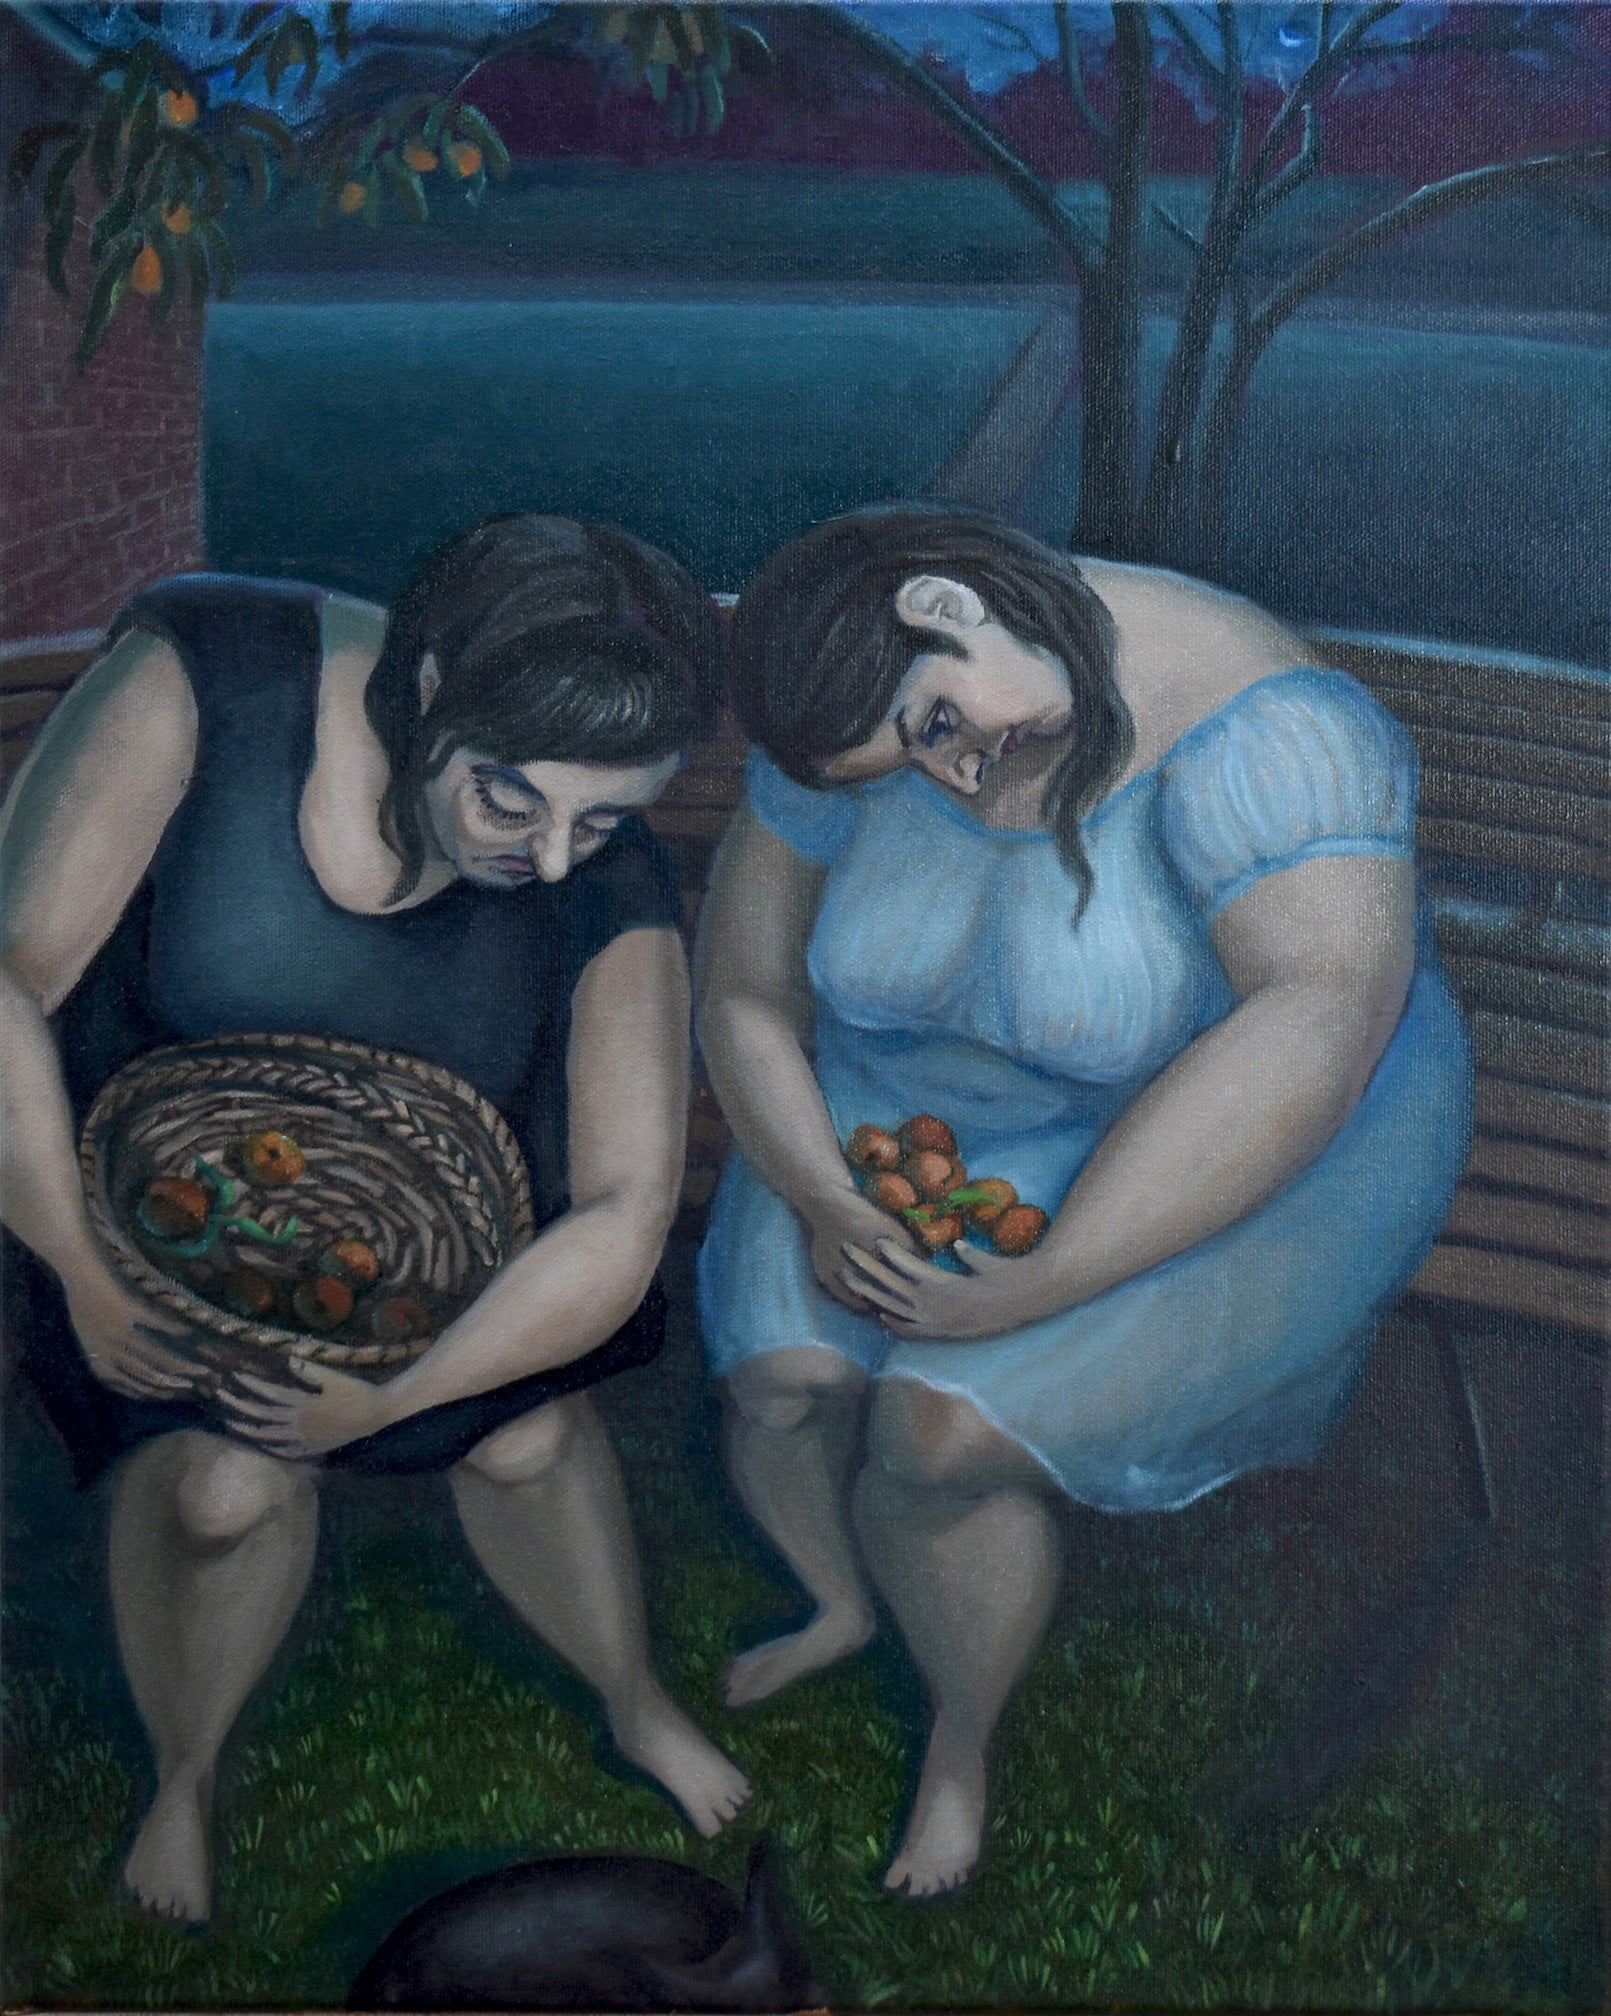 Emily Royer, "We gathered what was left and said goodbye." SOLD